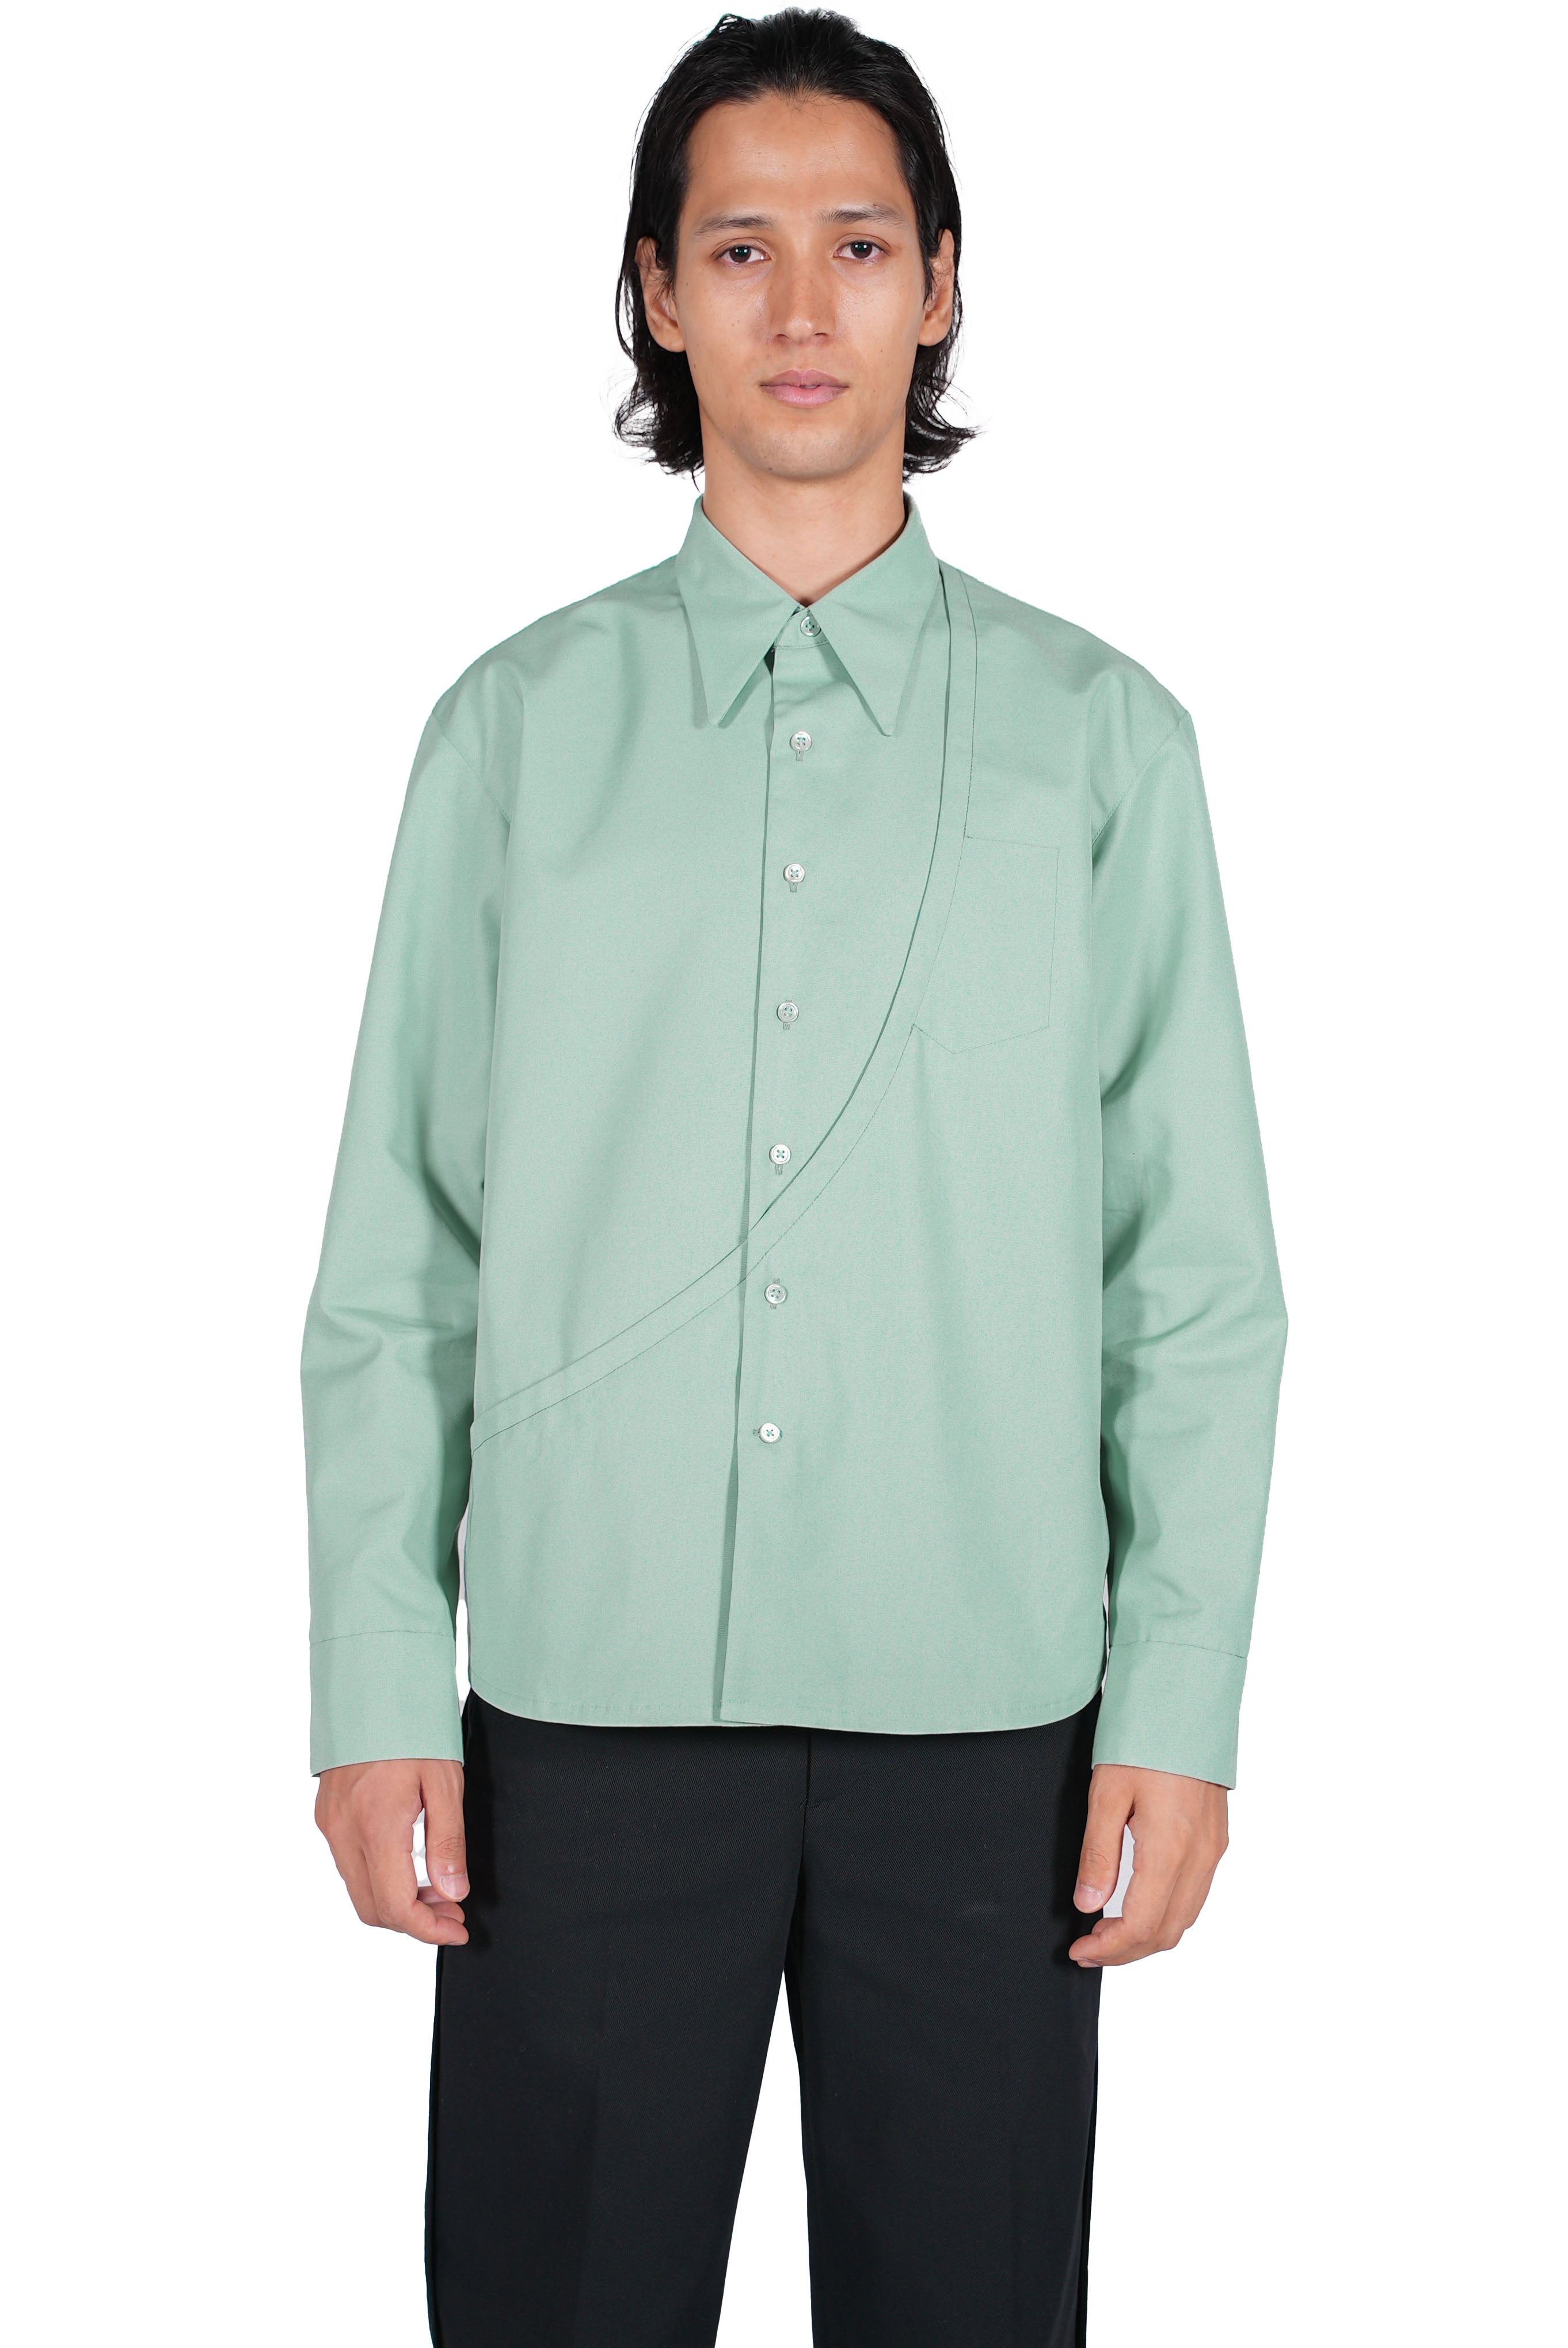 celineours strong 002 green shirt jacket